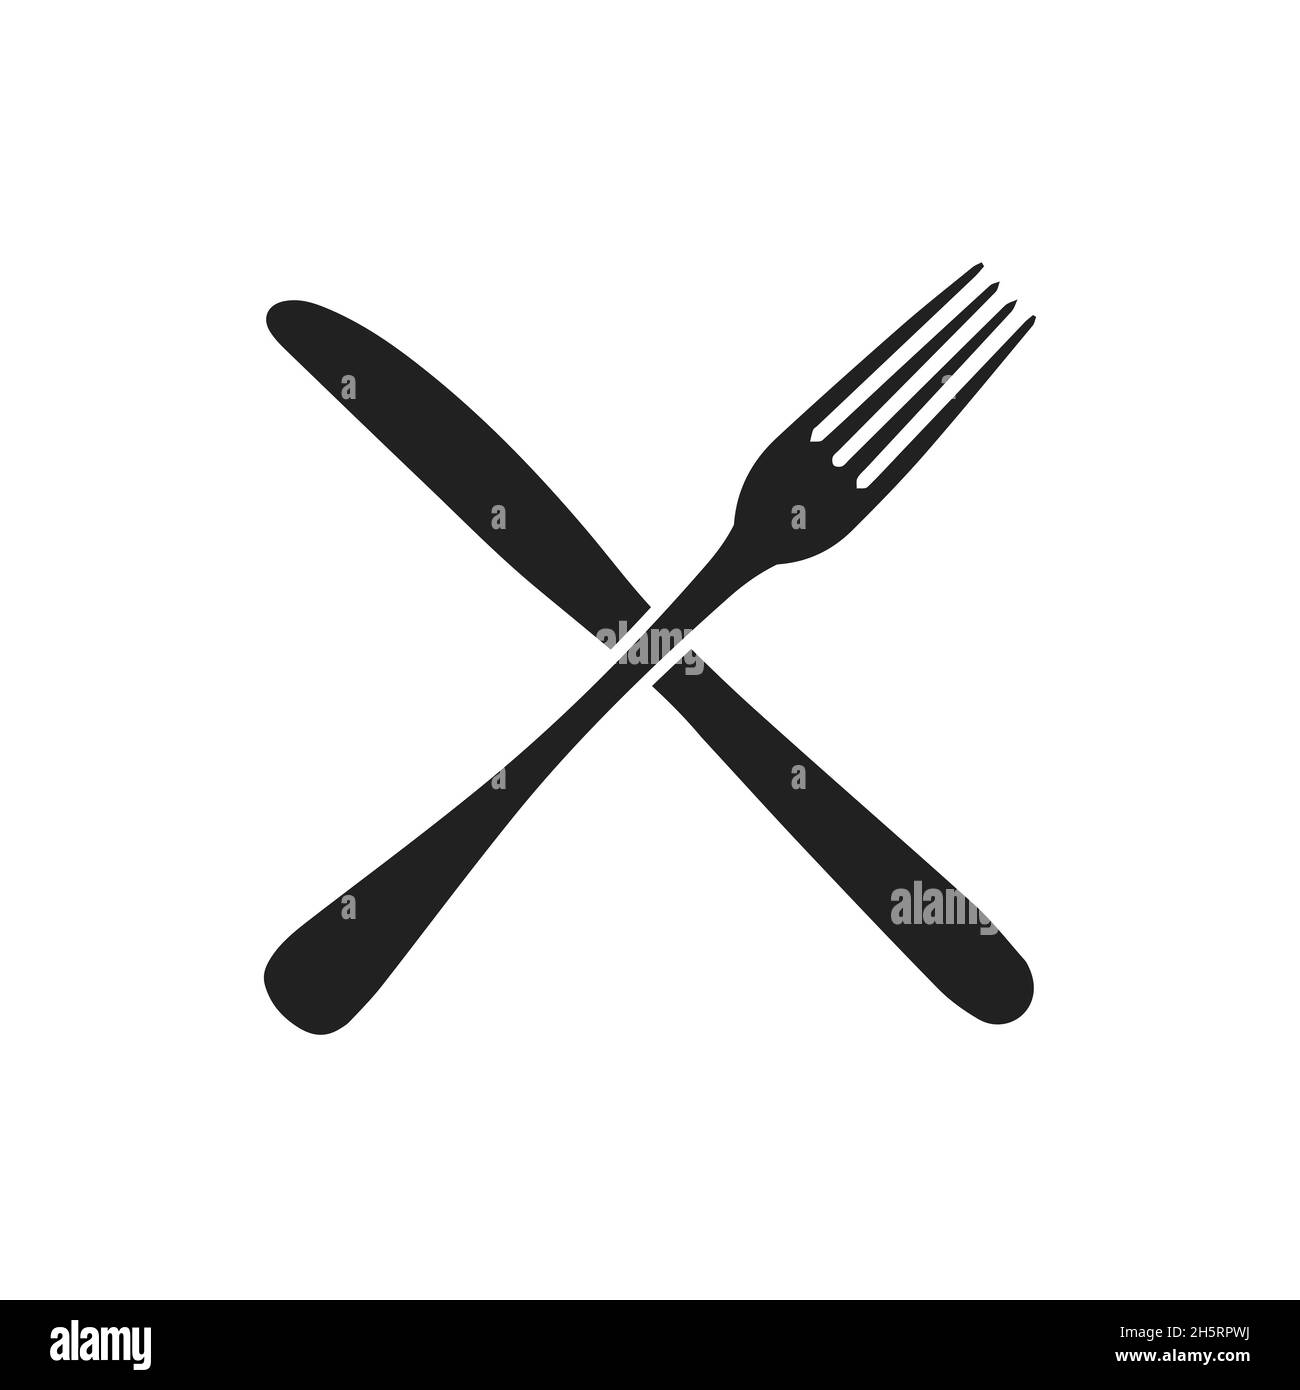 Cutlery icon in flat style for wab. Isolated vector illustration Stock Vector